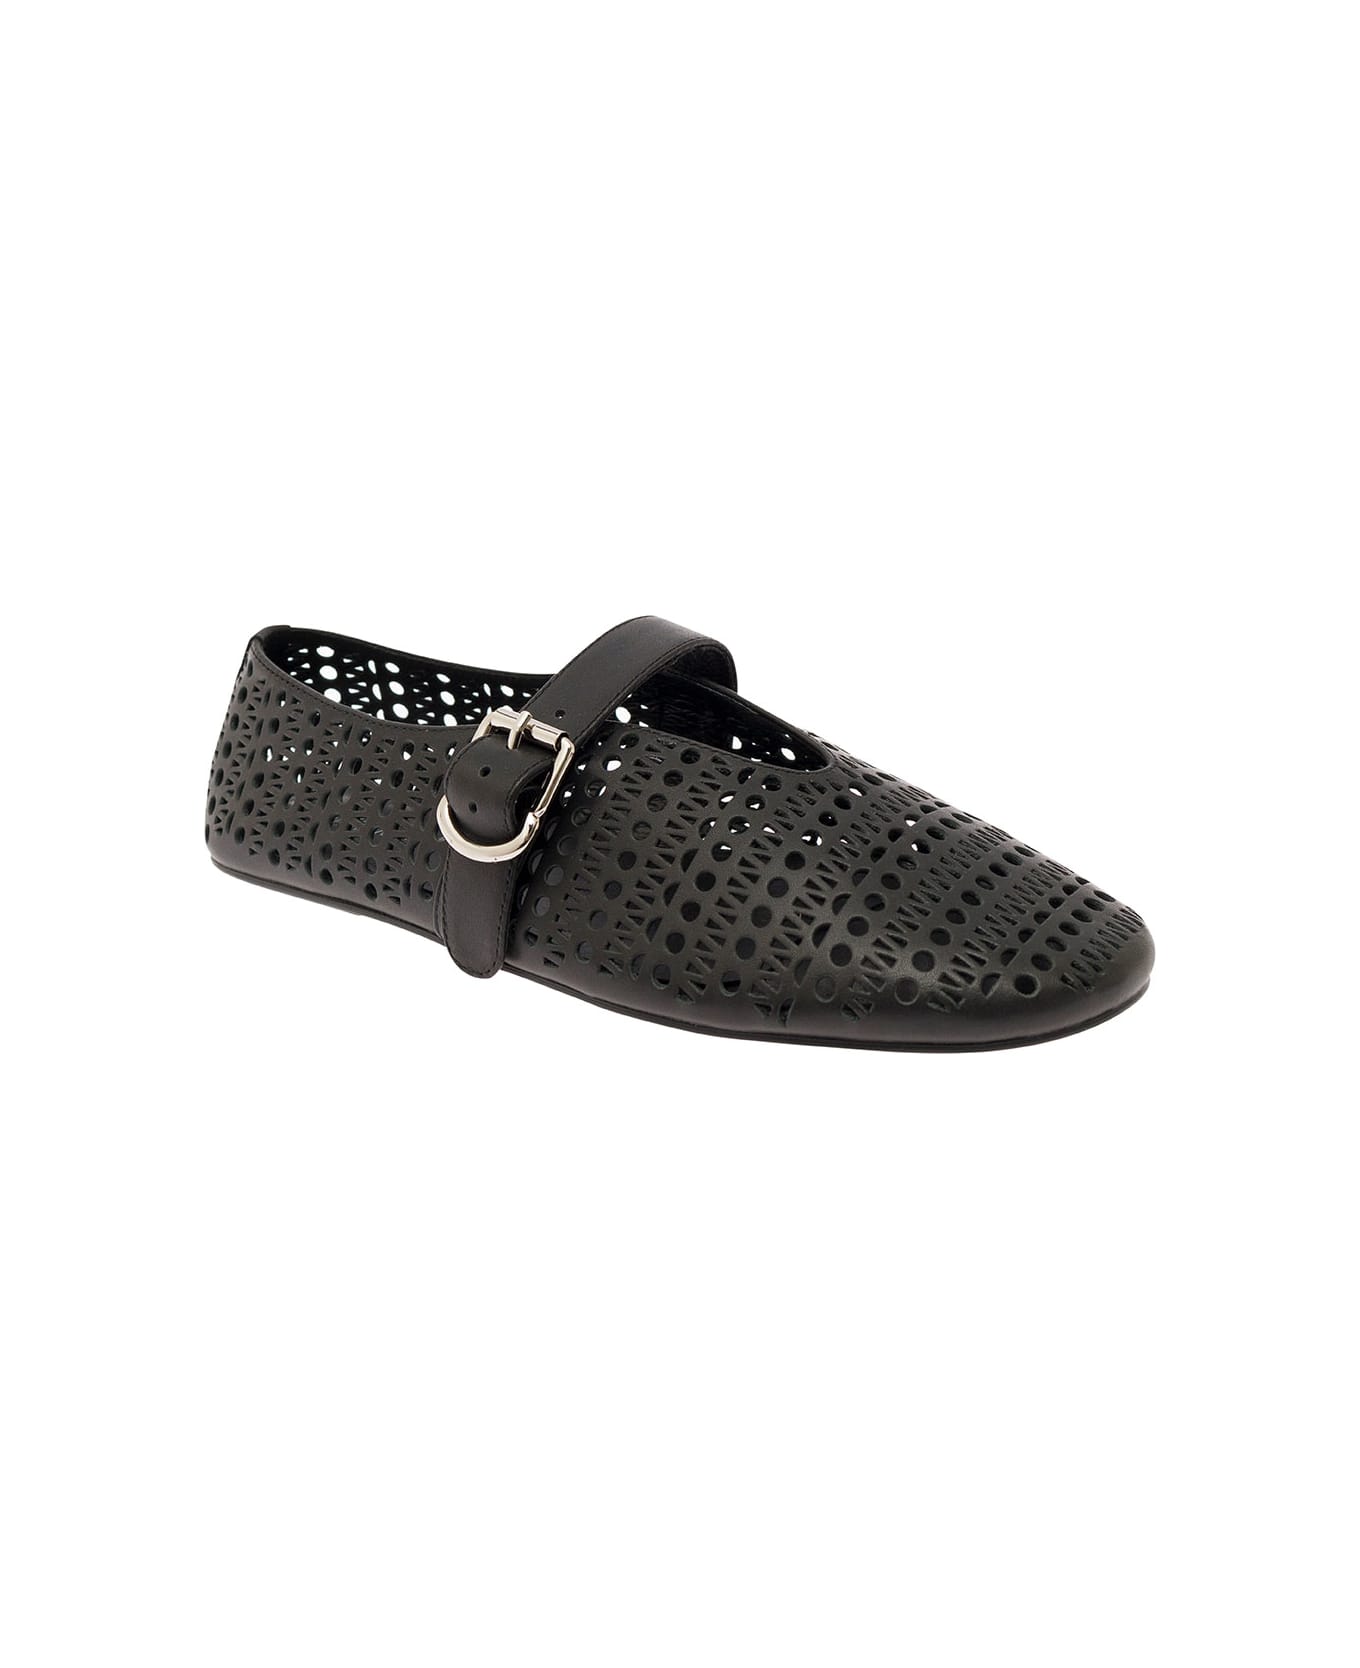 Jeffrey Campbell 'shelly' Black Ballet Flats With Maxi Buckle In Lace Effect Leather Woman - Black